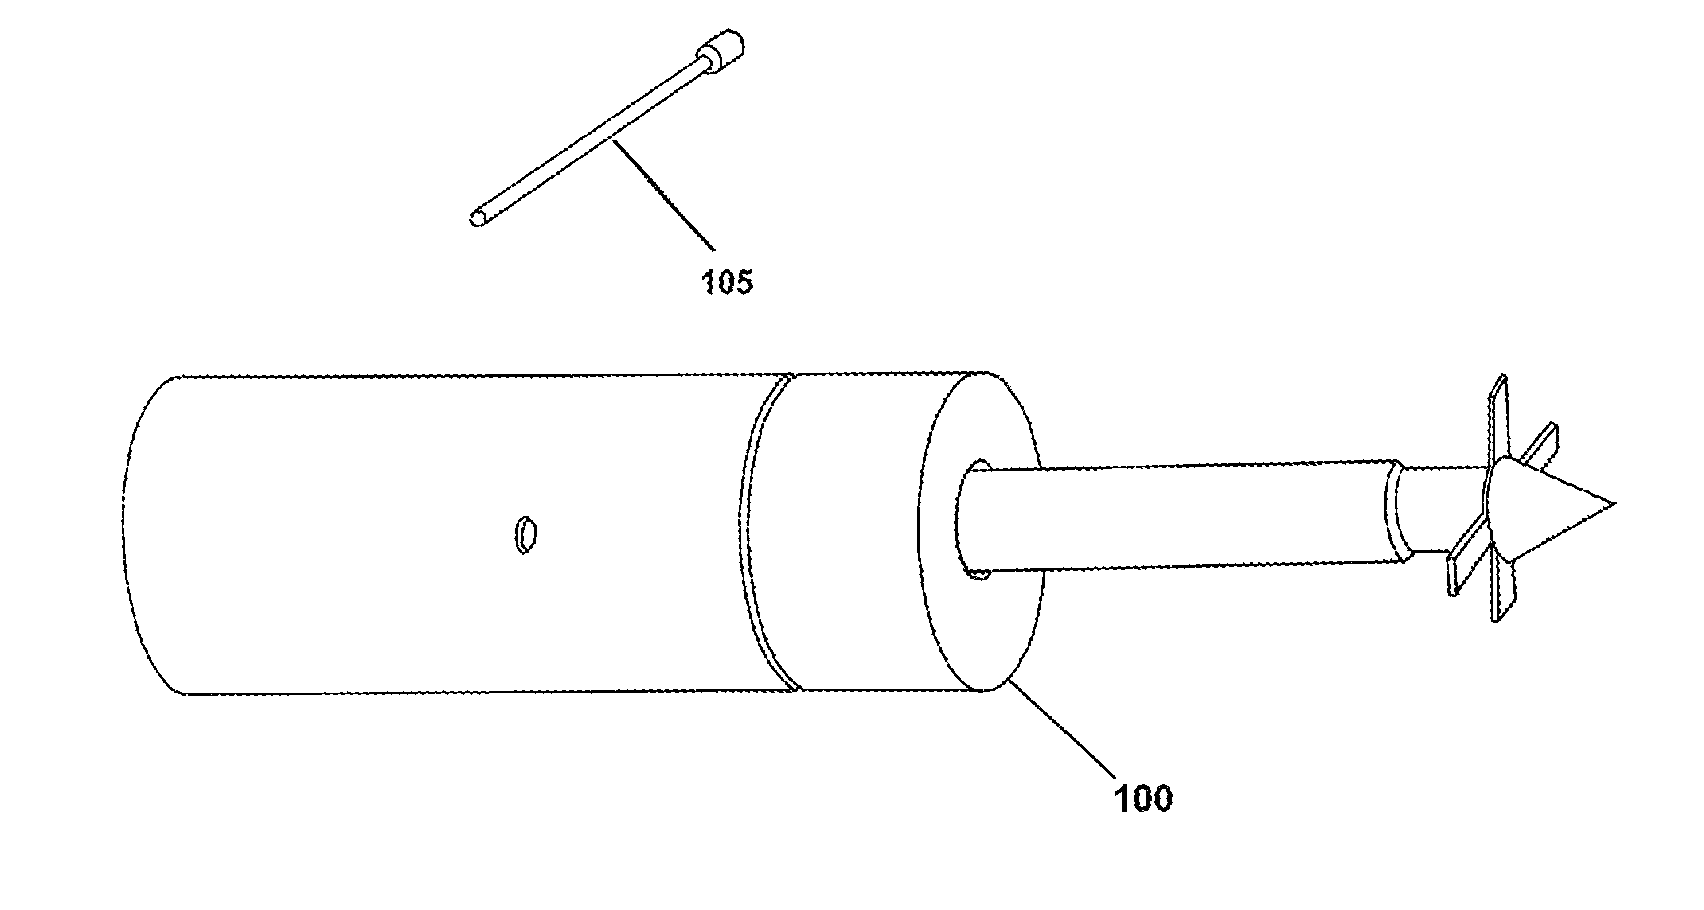 Projectile device and method for targeted vehicle tracking